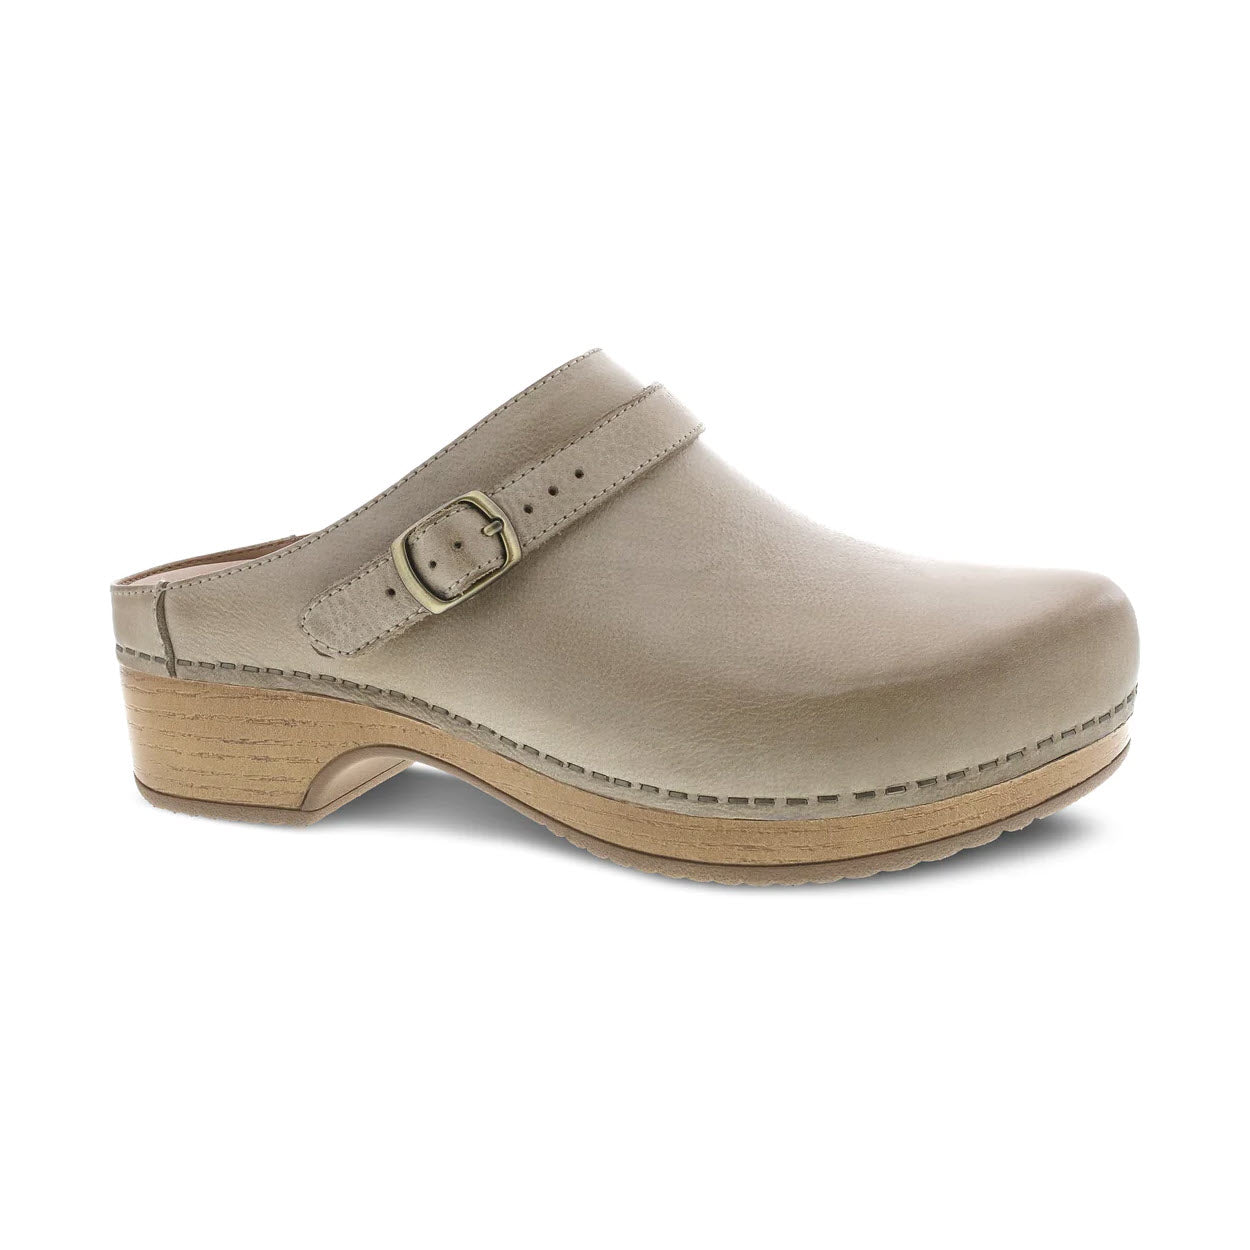 A Dansko beige leather mule with a wooden sole and a buckle on the side, isolated on a white background.